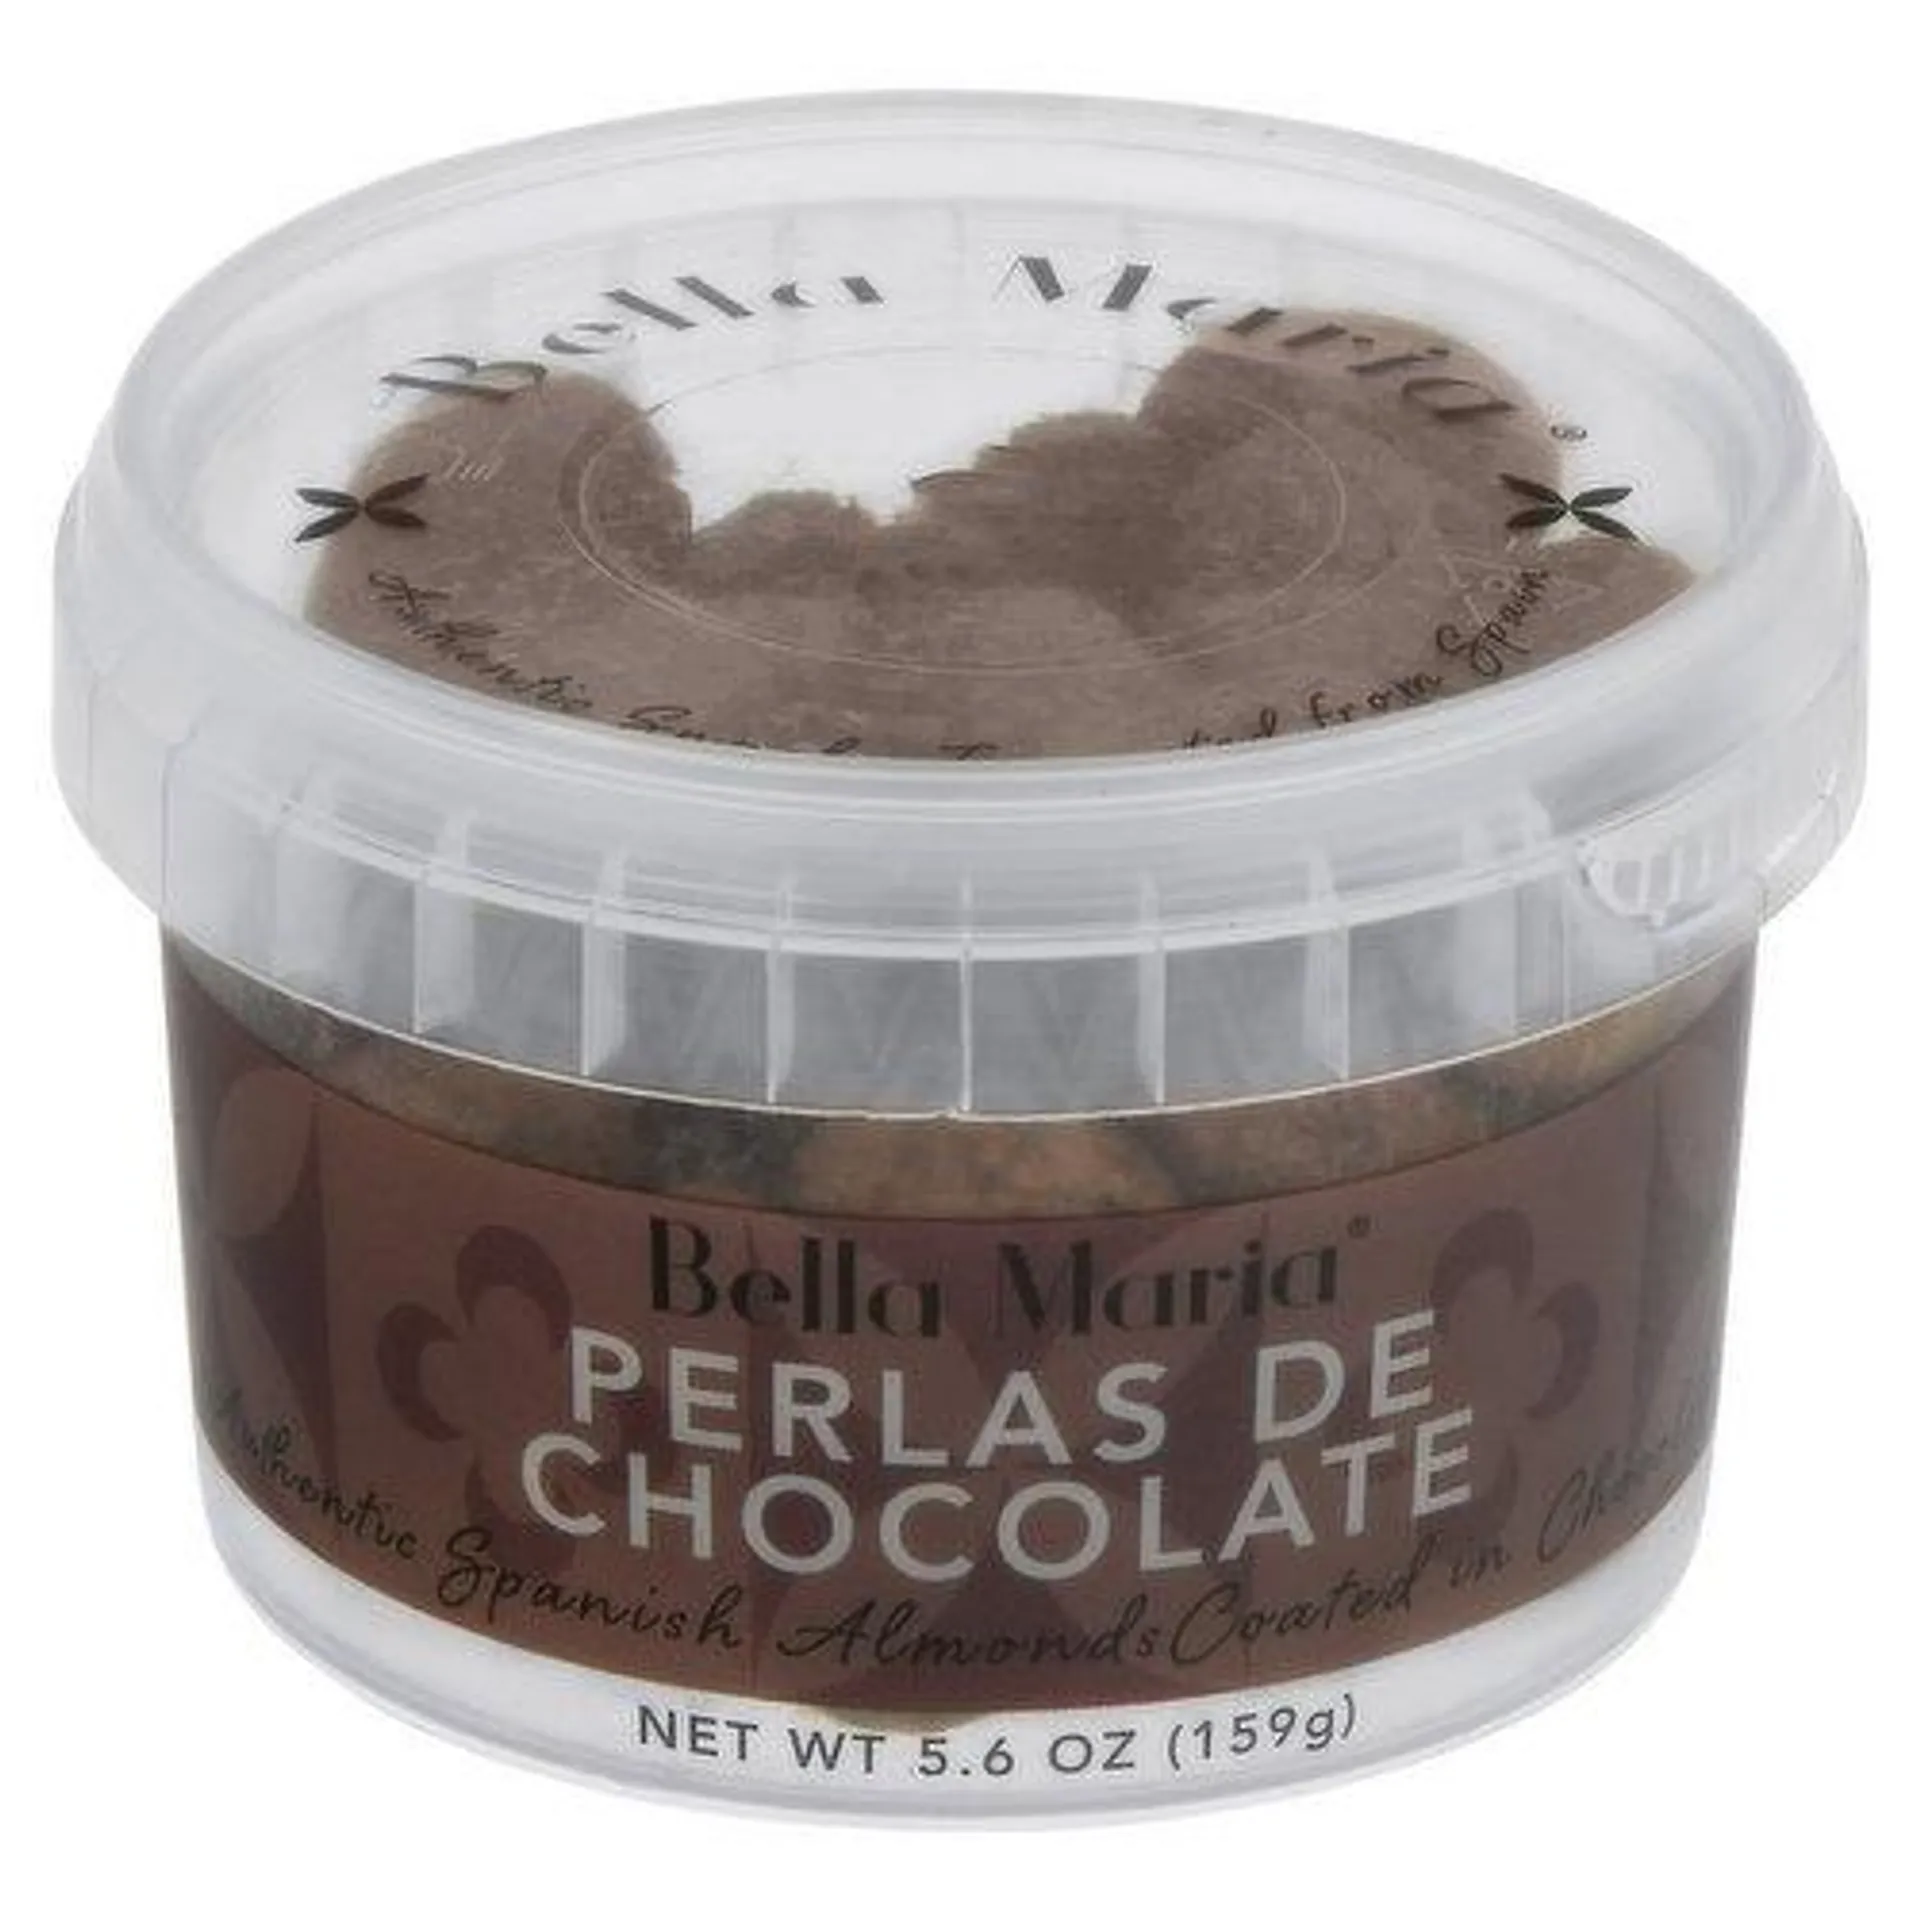 Bella Maria Almonds, Authentic Spanish, Coated in Chocolate - 5.6 Ounce